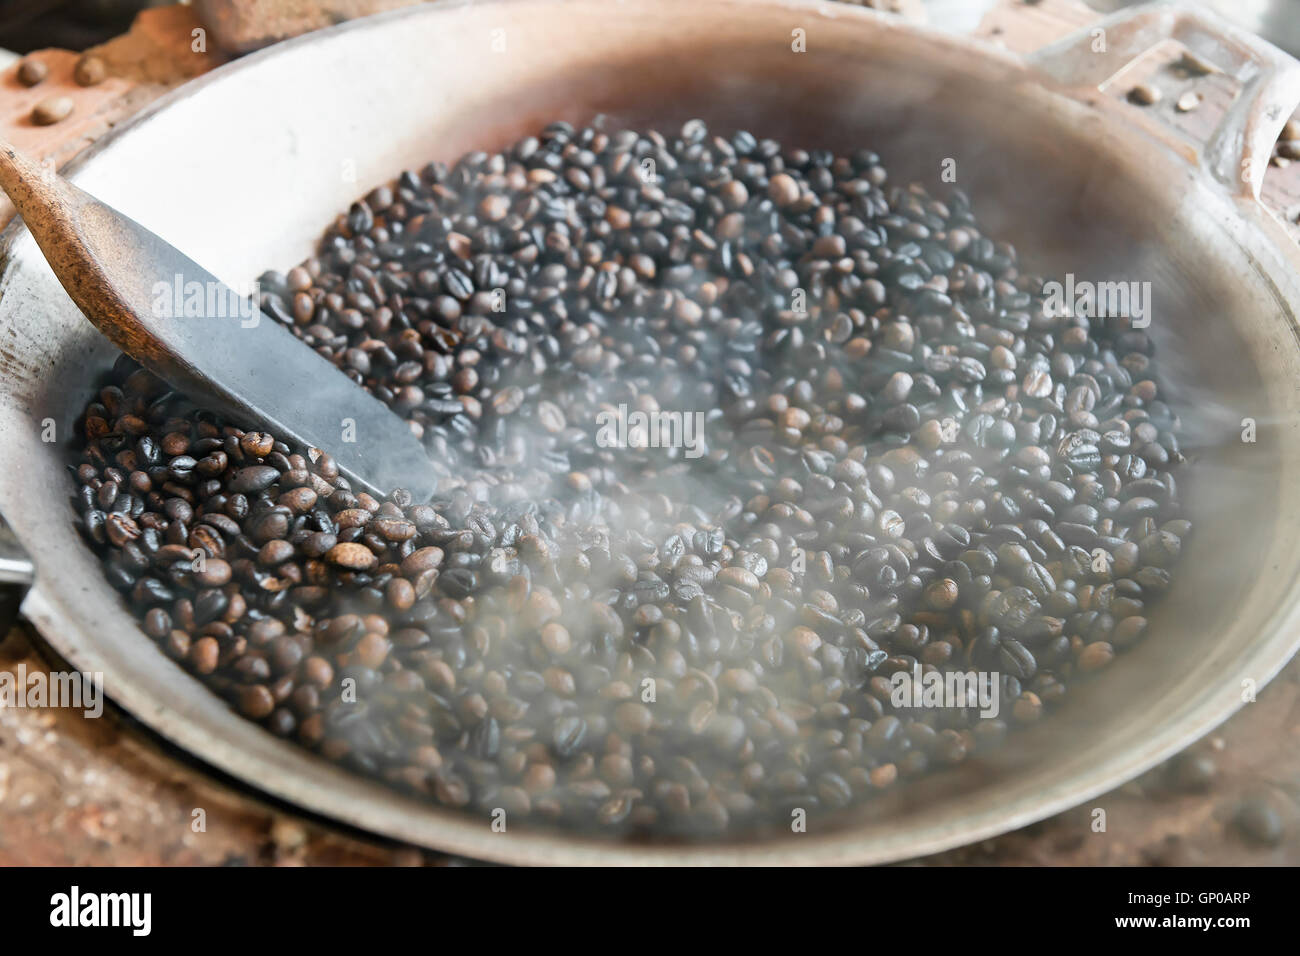 Traditional roasting coffee beans in pan. Stock Photo